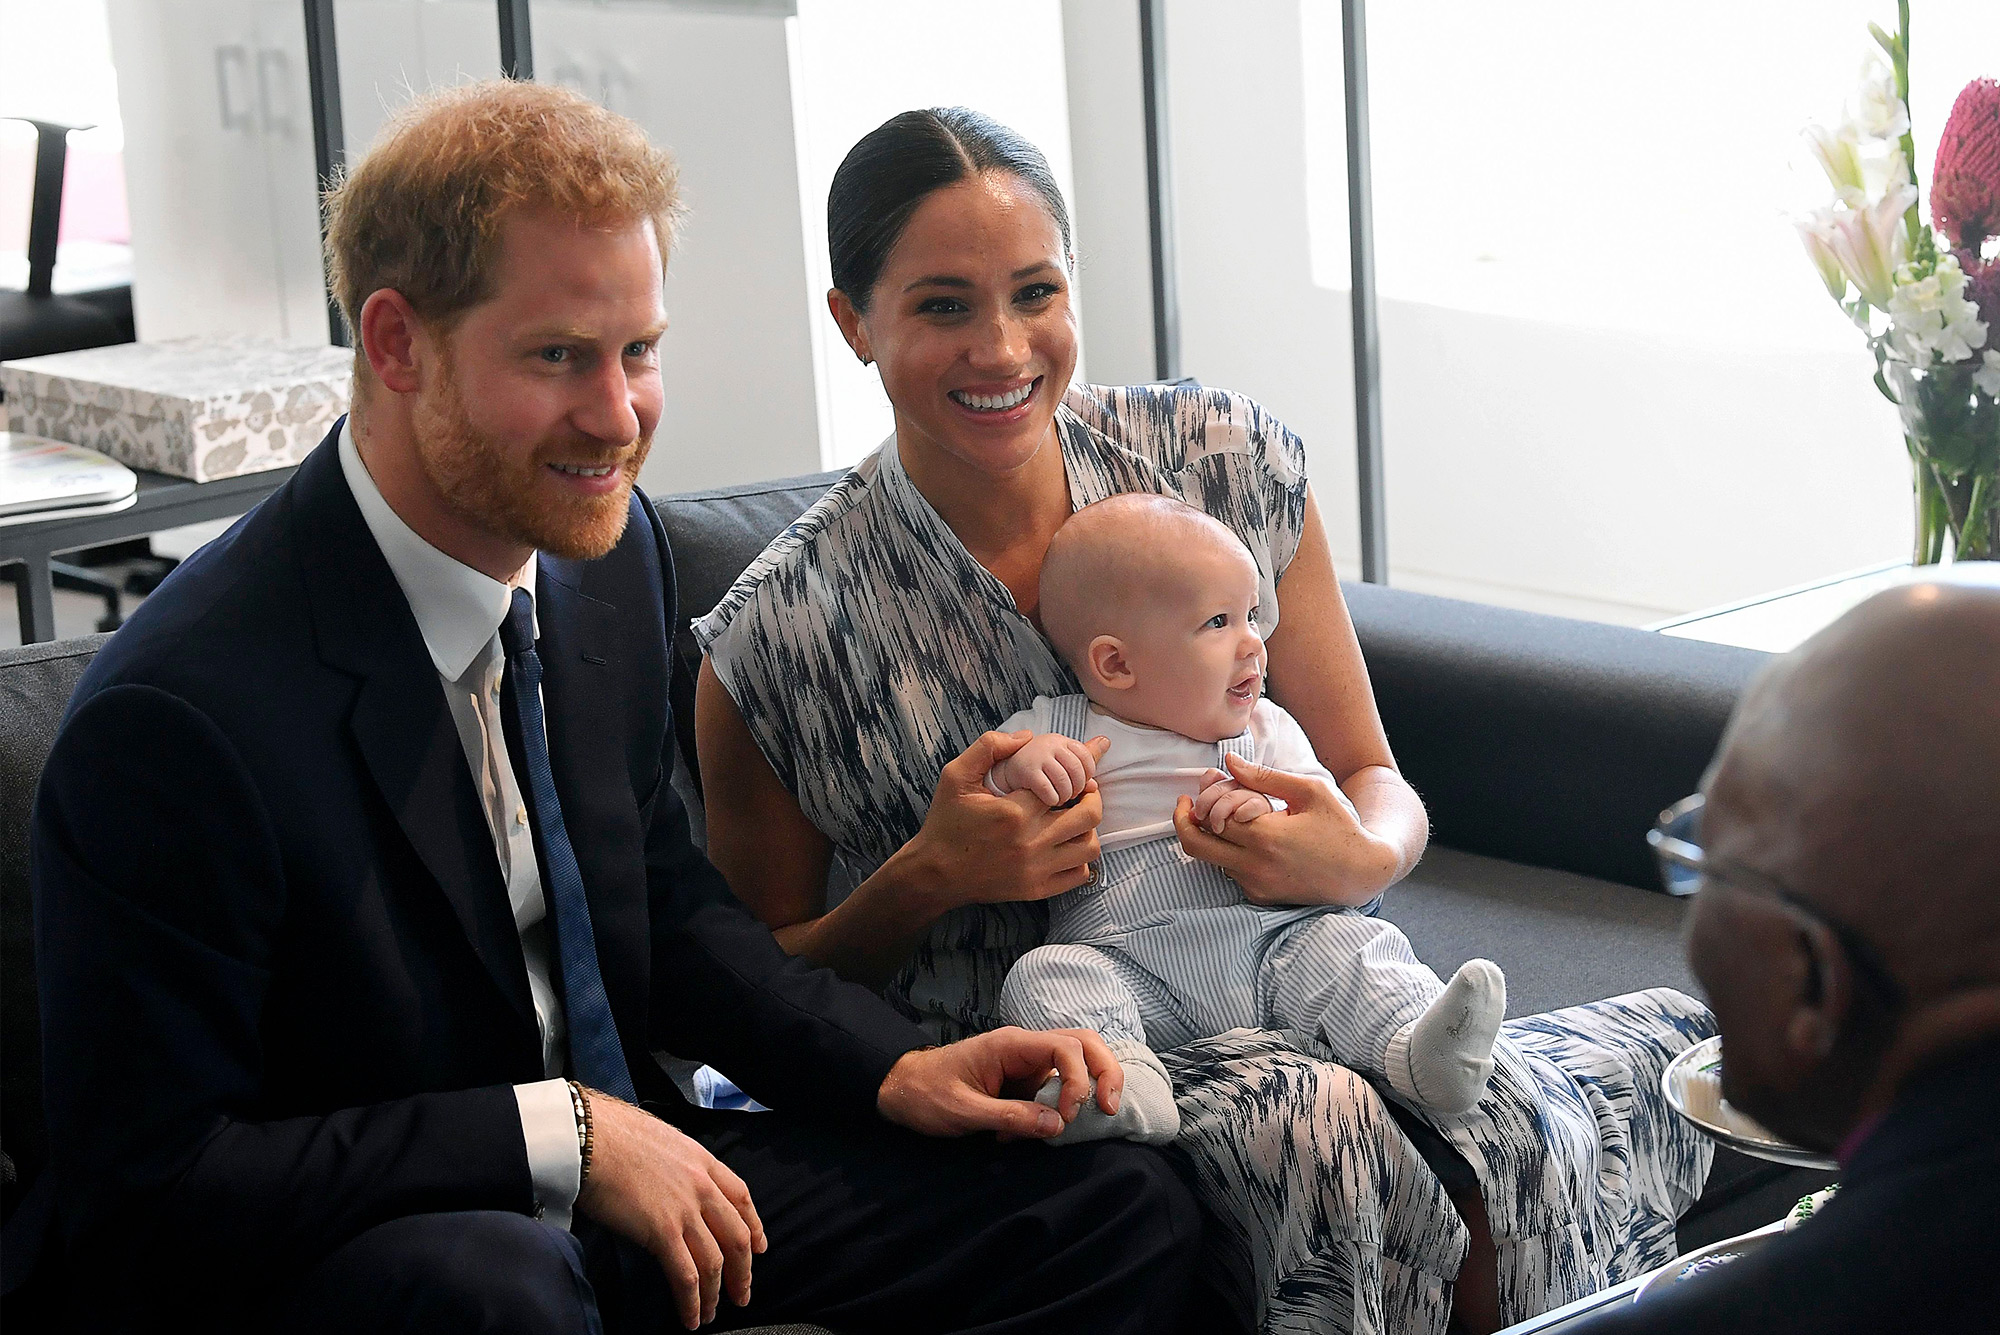 Prince Harry Calls Royal Family Member's Concerns About Son Archie’s Skin Color Not ‘Racist’- 'Always Been Open to Wanting to Help Them Understand' - 883 Prince Harry and Meghan Duchess of Sussex visit to Africa - 25 Sep 2019